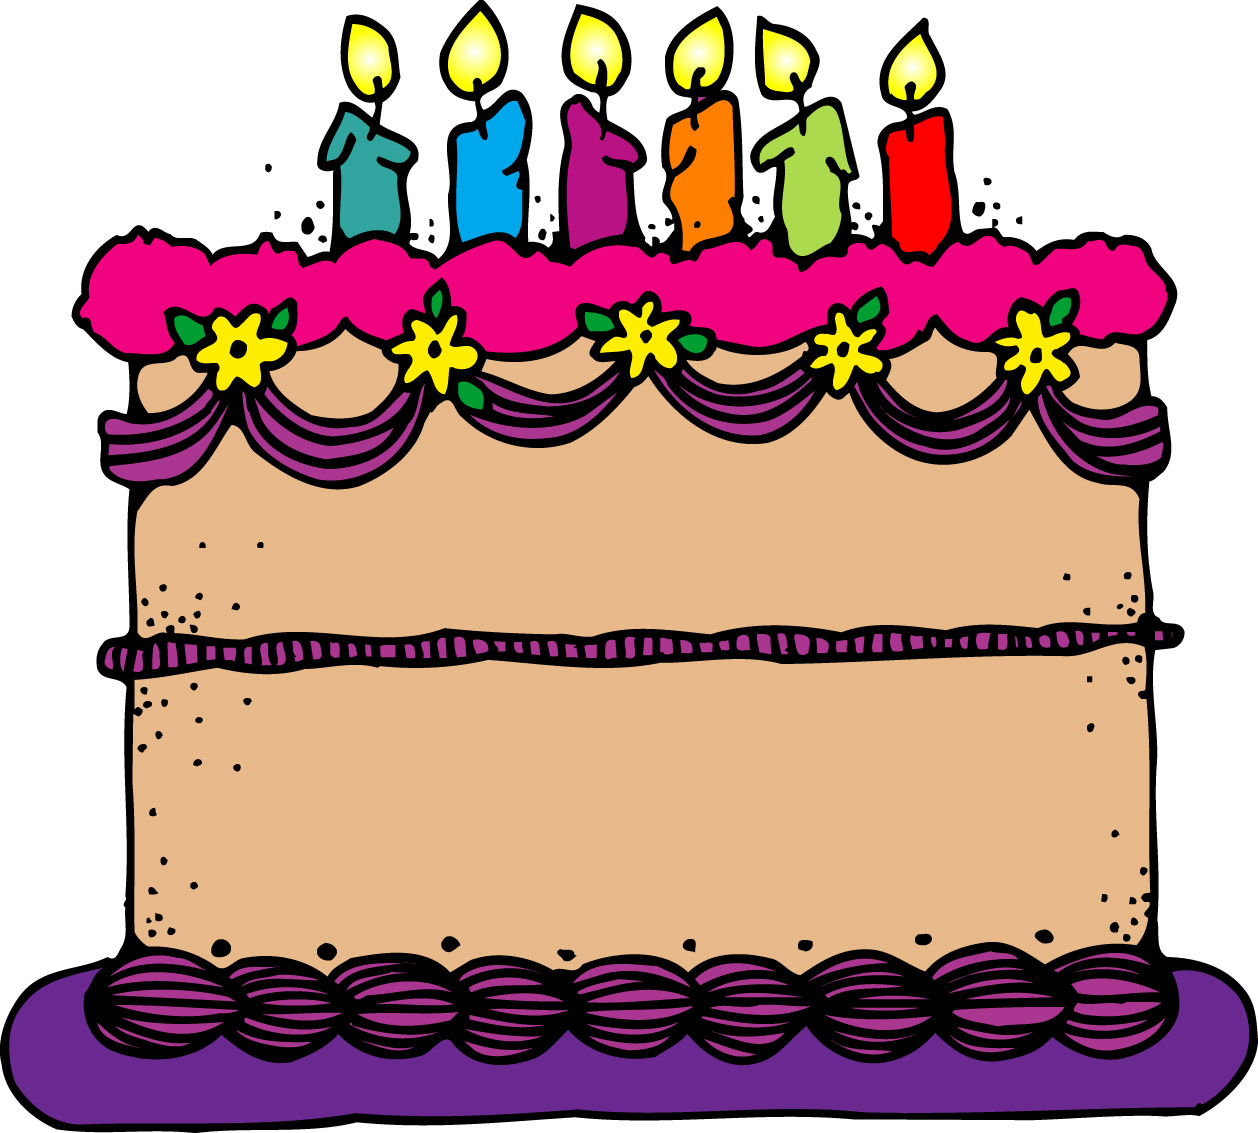 Pink Birthday Cake Clipart | Clipart Panda - Free Clipart Images